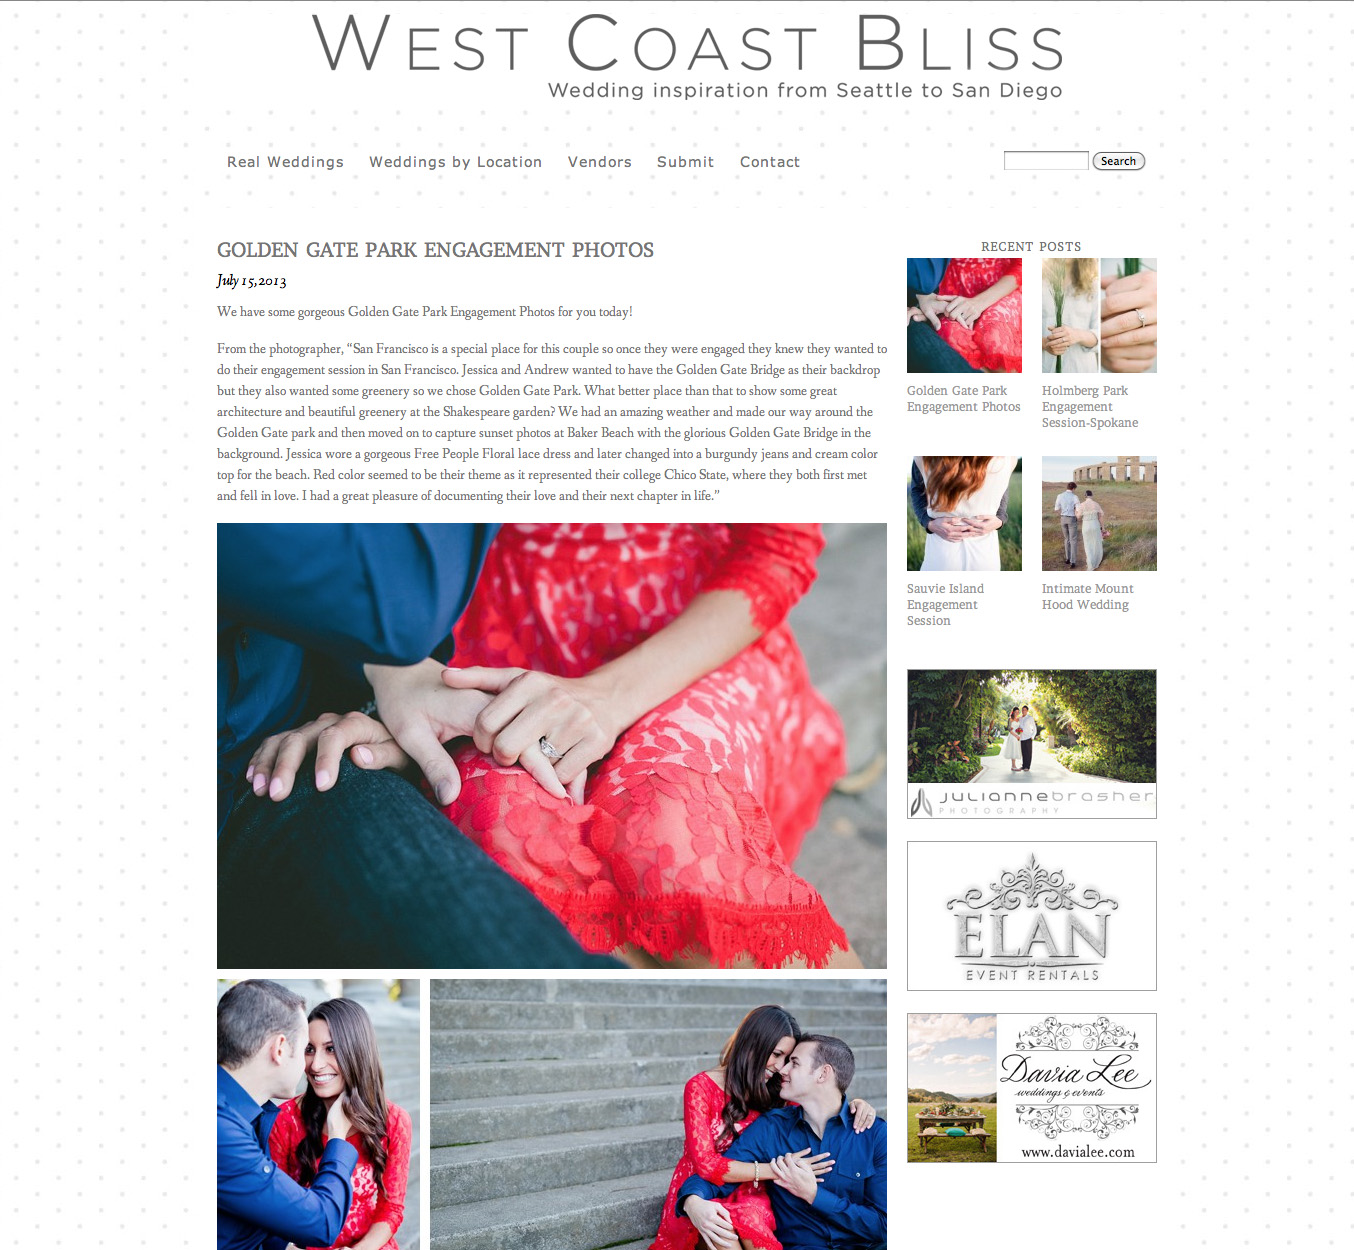 Indu-Huynh-Photography-Featured-Engagement-West-Coast-Bliss